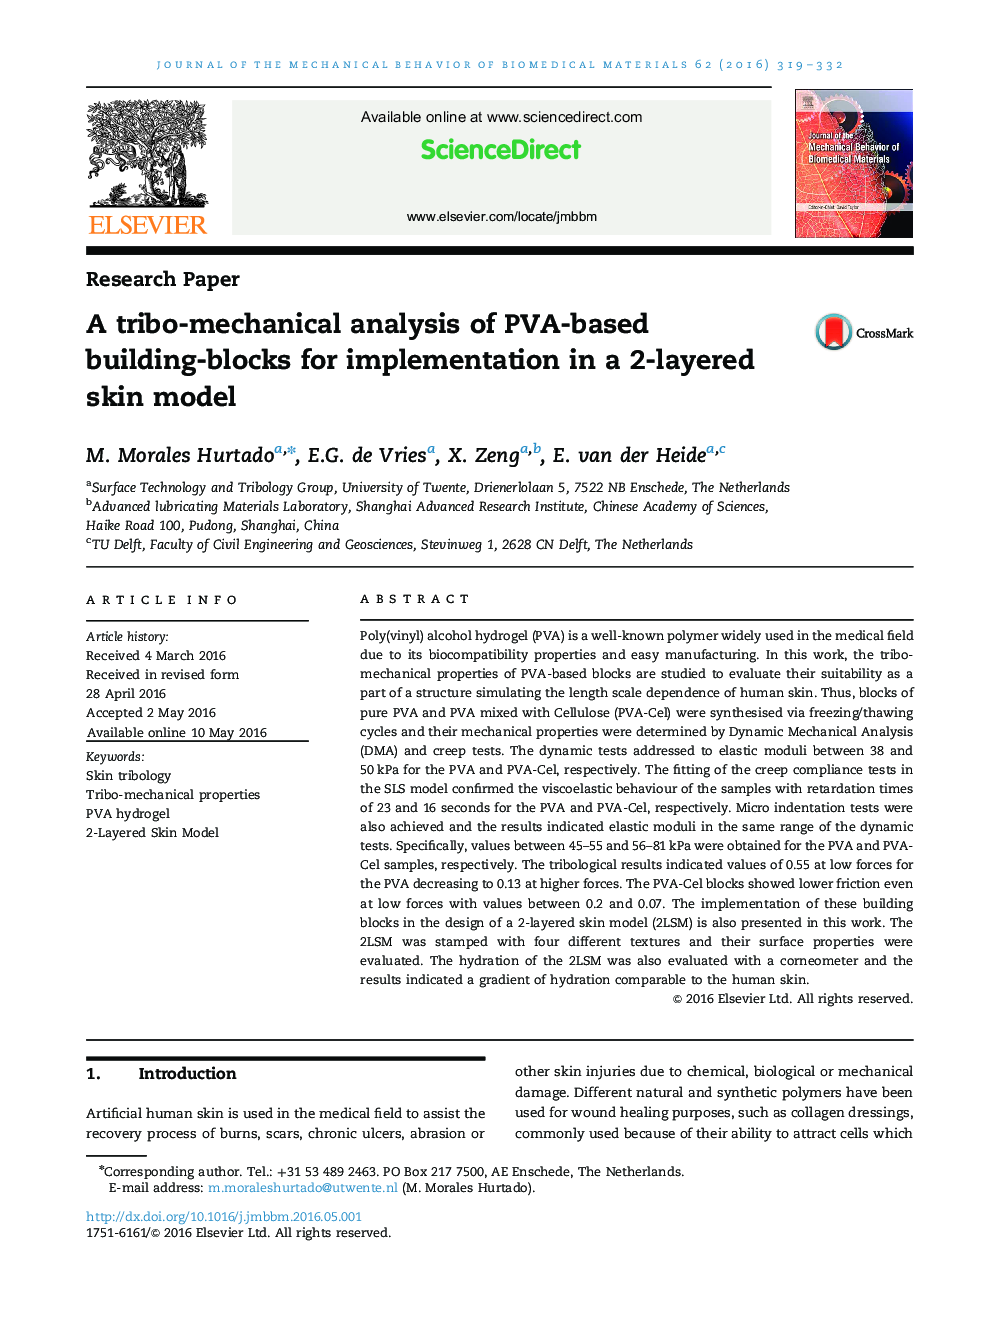 A tribo-mechanical analysis of PVA-based building-blocks for implementation in a 2-layered skin model